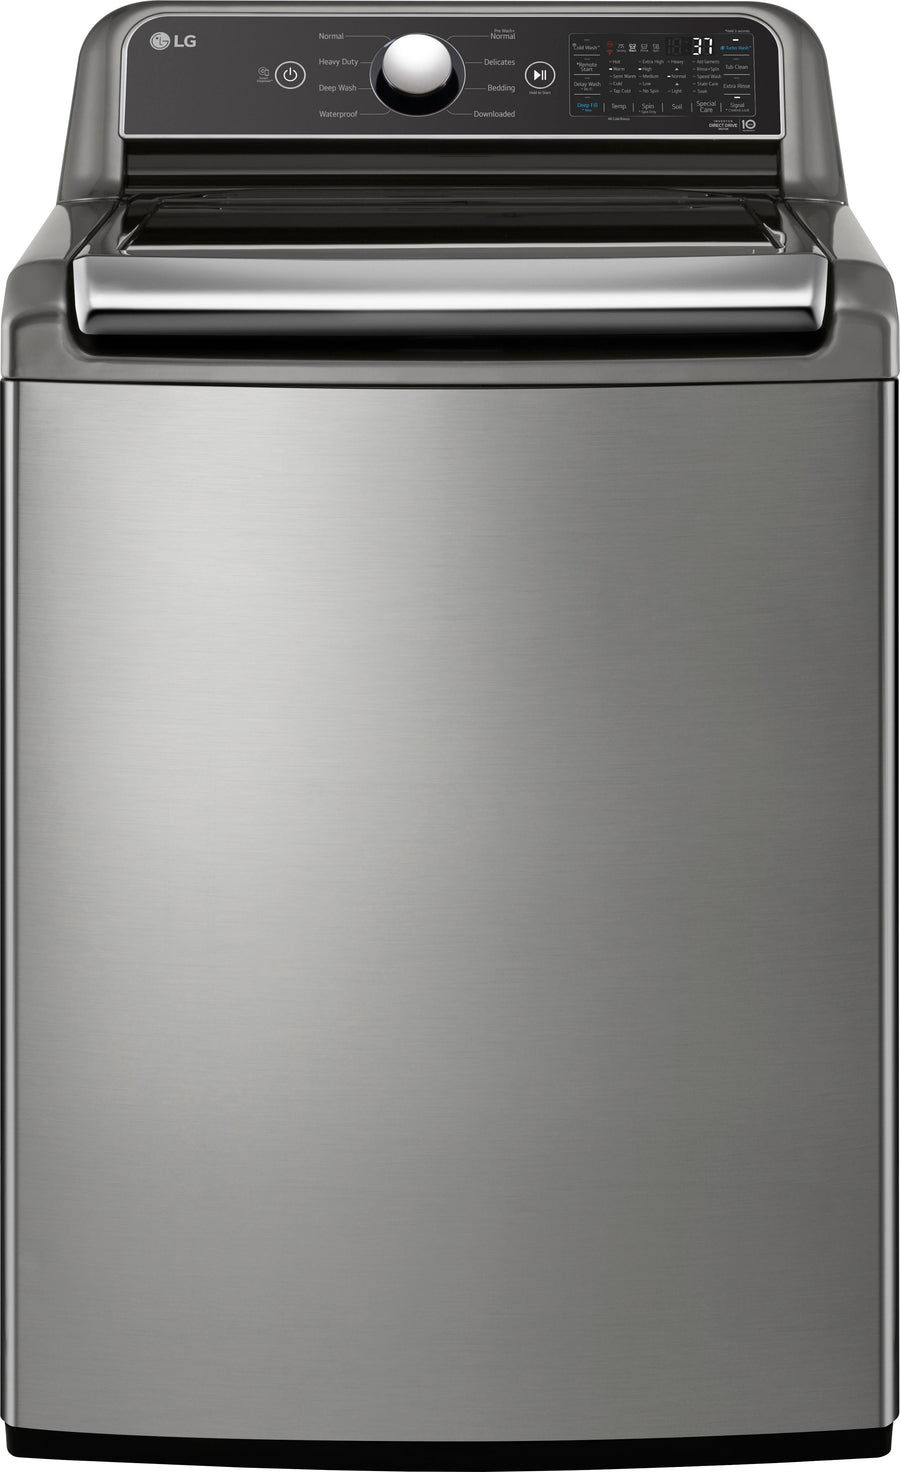 LG - 5.3 Cu. Ft. High-Efficiency Smart Top Load Washer with 4-Way Agitator and TurboWash3D - Graphite steel_0